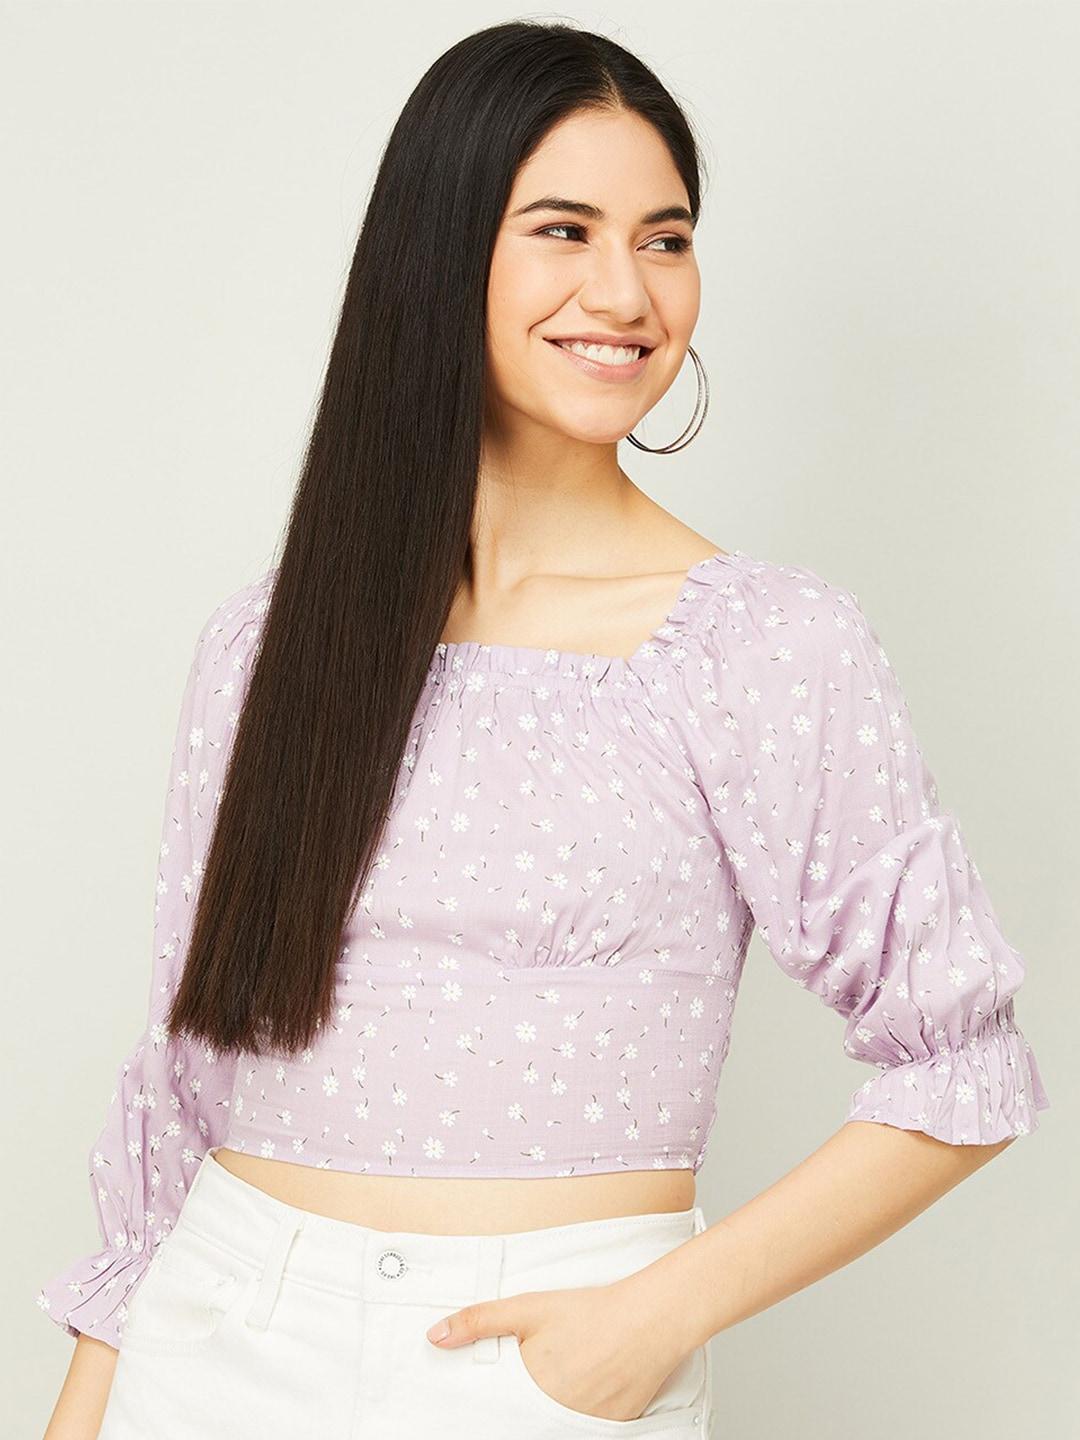 ginger-by-lifestyle-purple-floral-print-crop-top